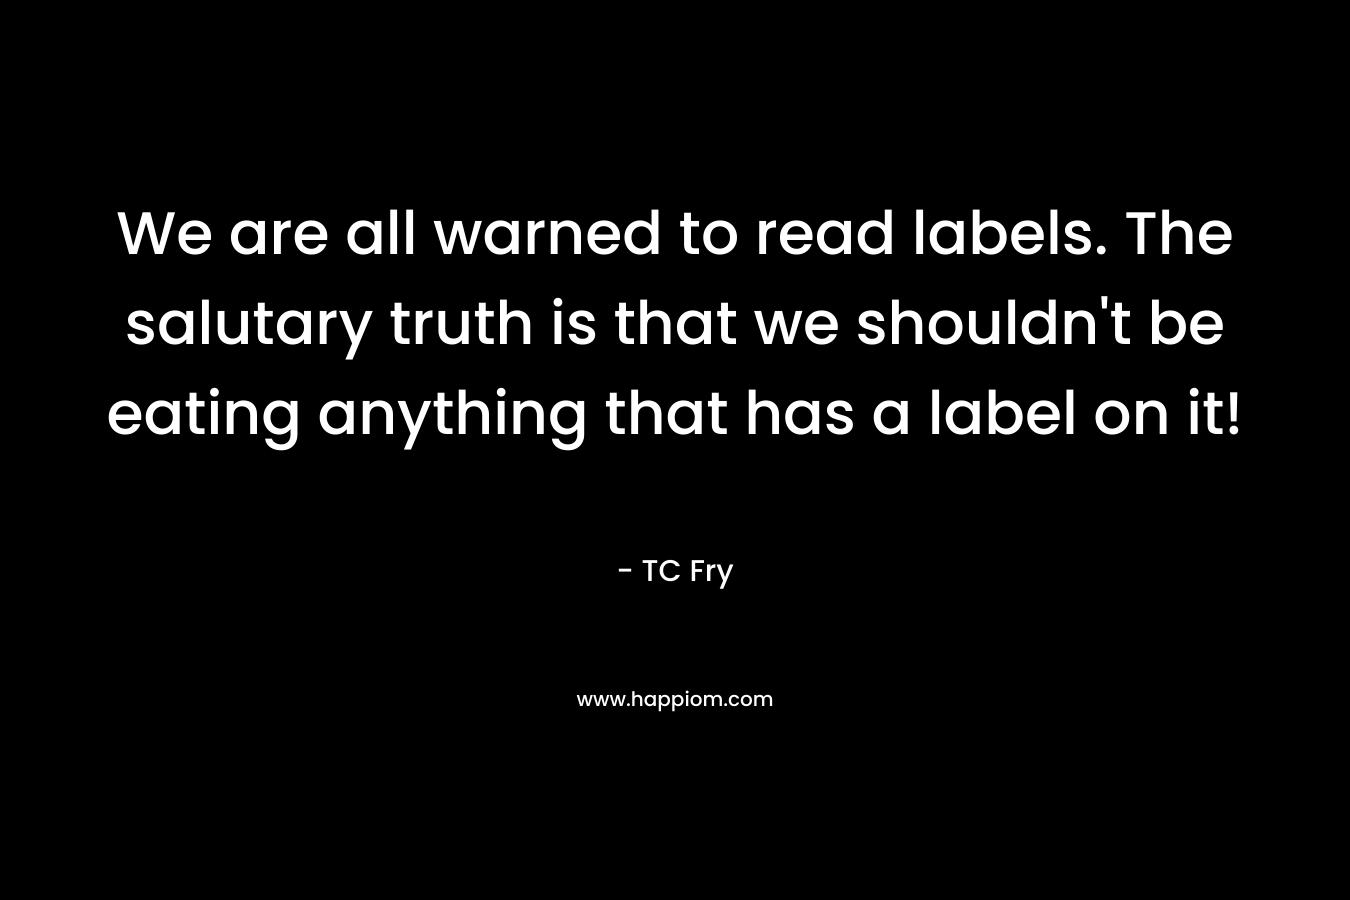 We are all warned to read labels. The salutary truth is that we shouldn’t be eating anything that has a label on it! – TC Fry